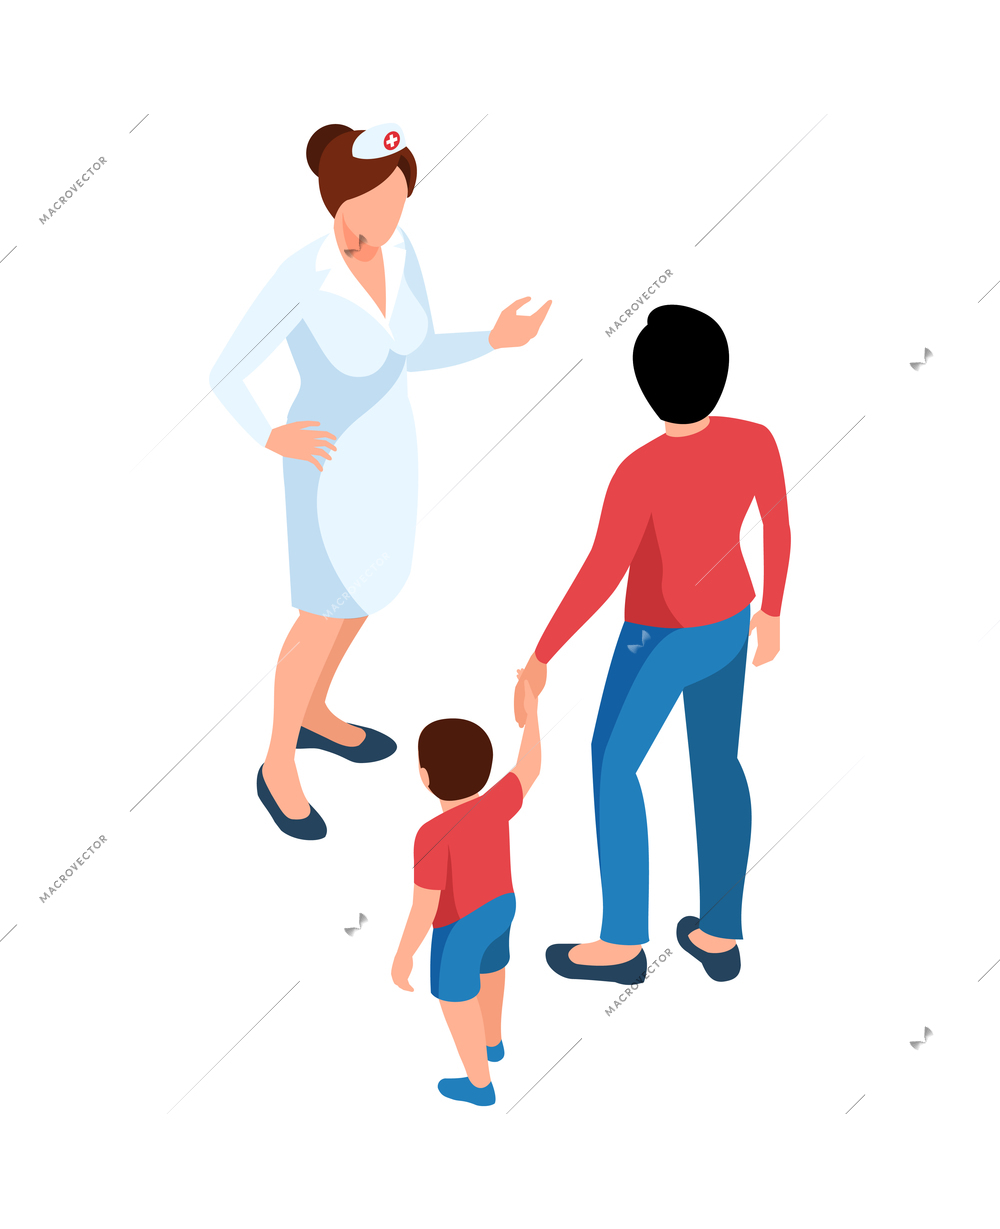 Isometric doctor pediatrician medicine composition with isolated human characters on blank background vector illustration